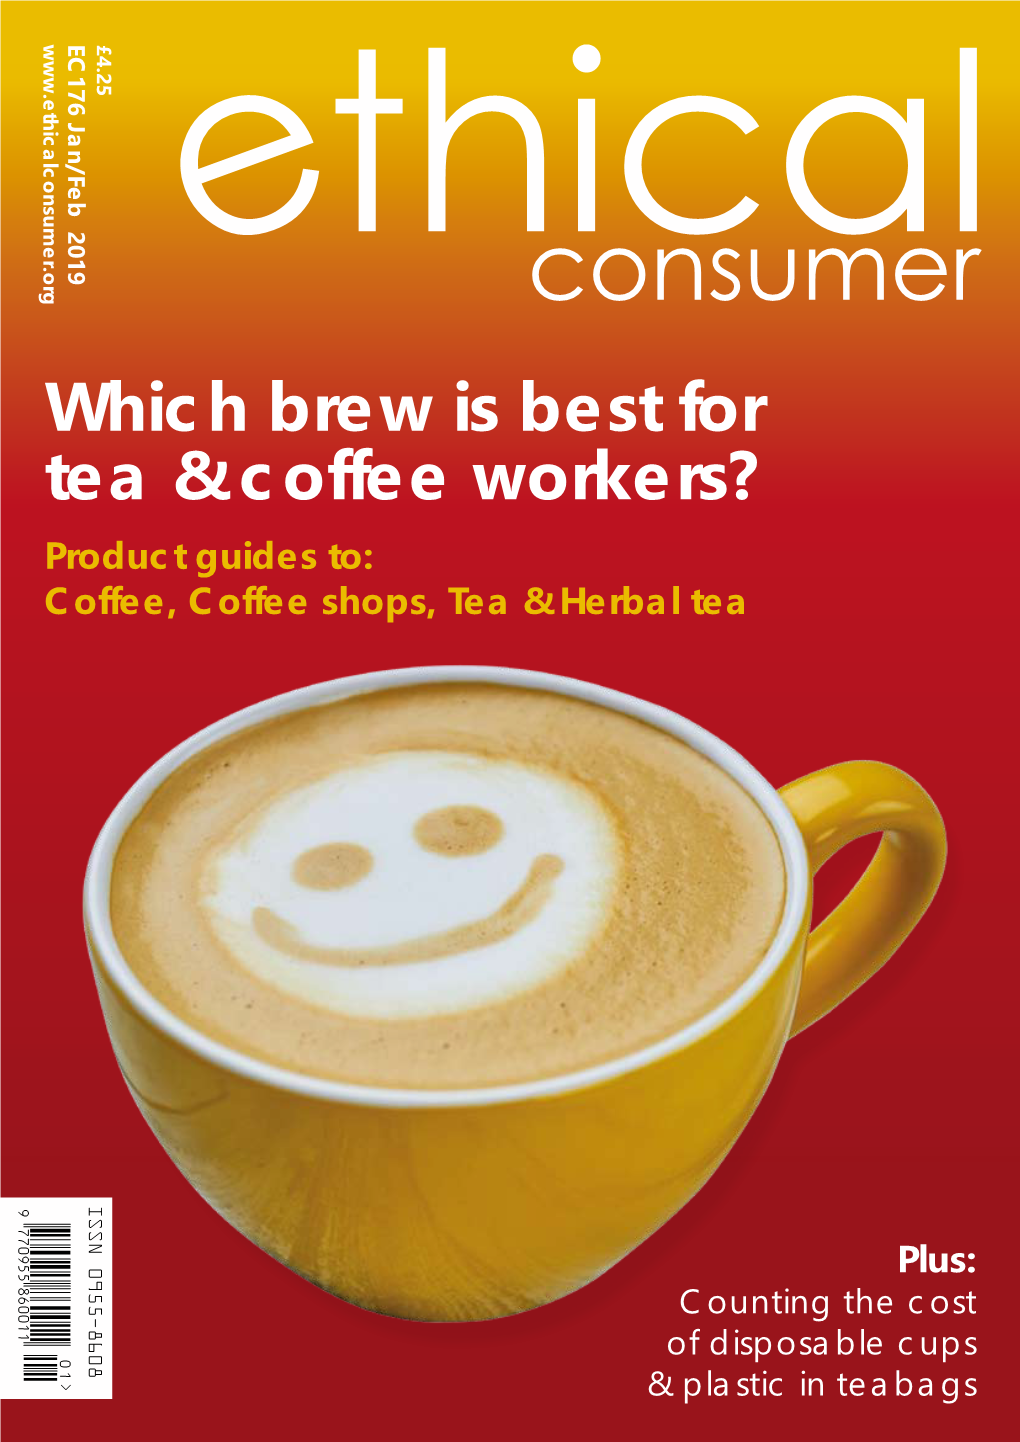 Which Brew Is Best for Tea & Coffee Workers?